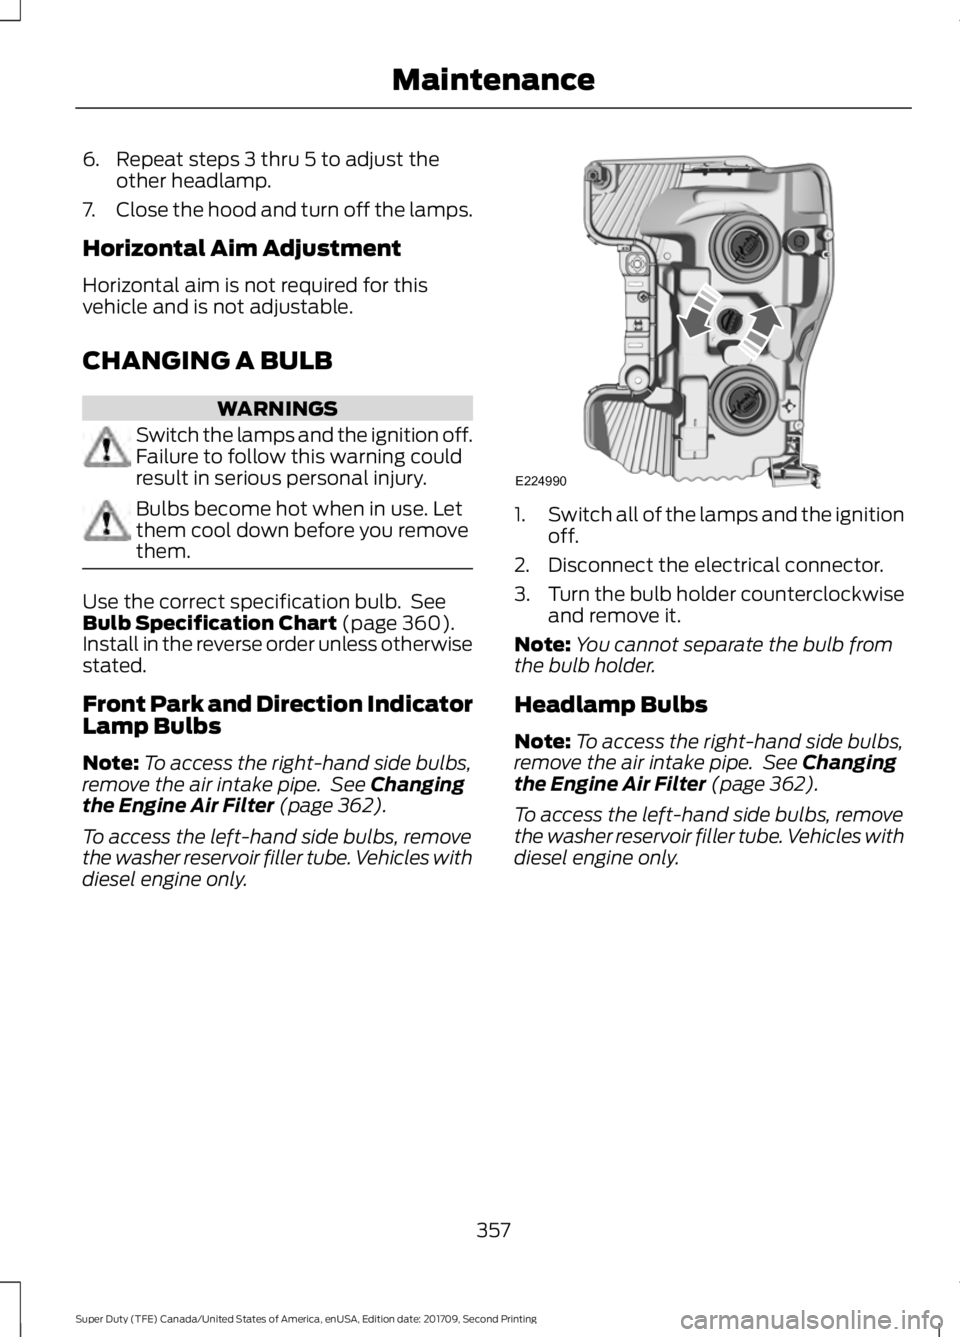 FORD F-450 2018  Owners Manual 6. Repeat steps 3 thru 5 to adjust the
other headlamp.
7. Close the hood and turn off the lamps.
Horizontal Aim Adjustment
Horizontal aim is not required for this
vehicle and is not adjustable.
CHANGI